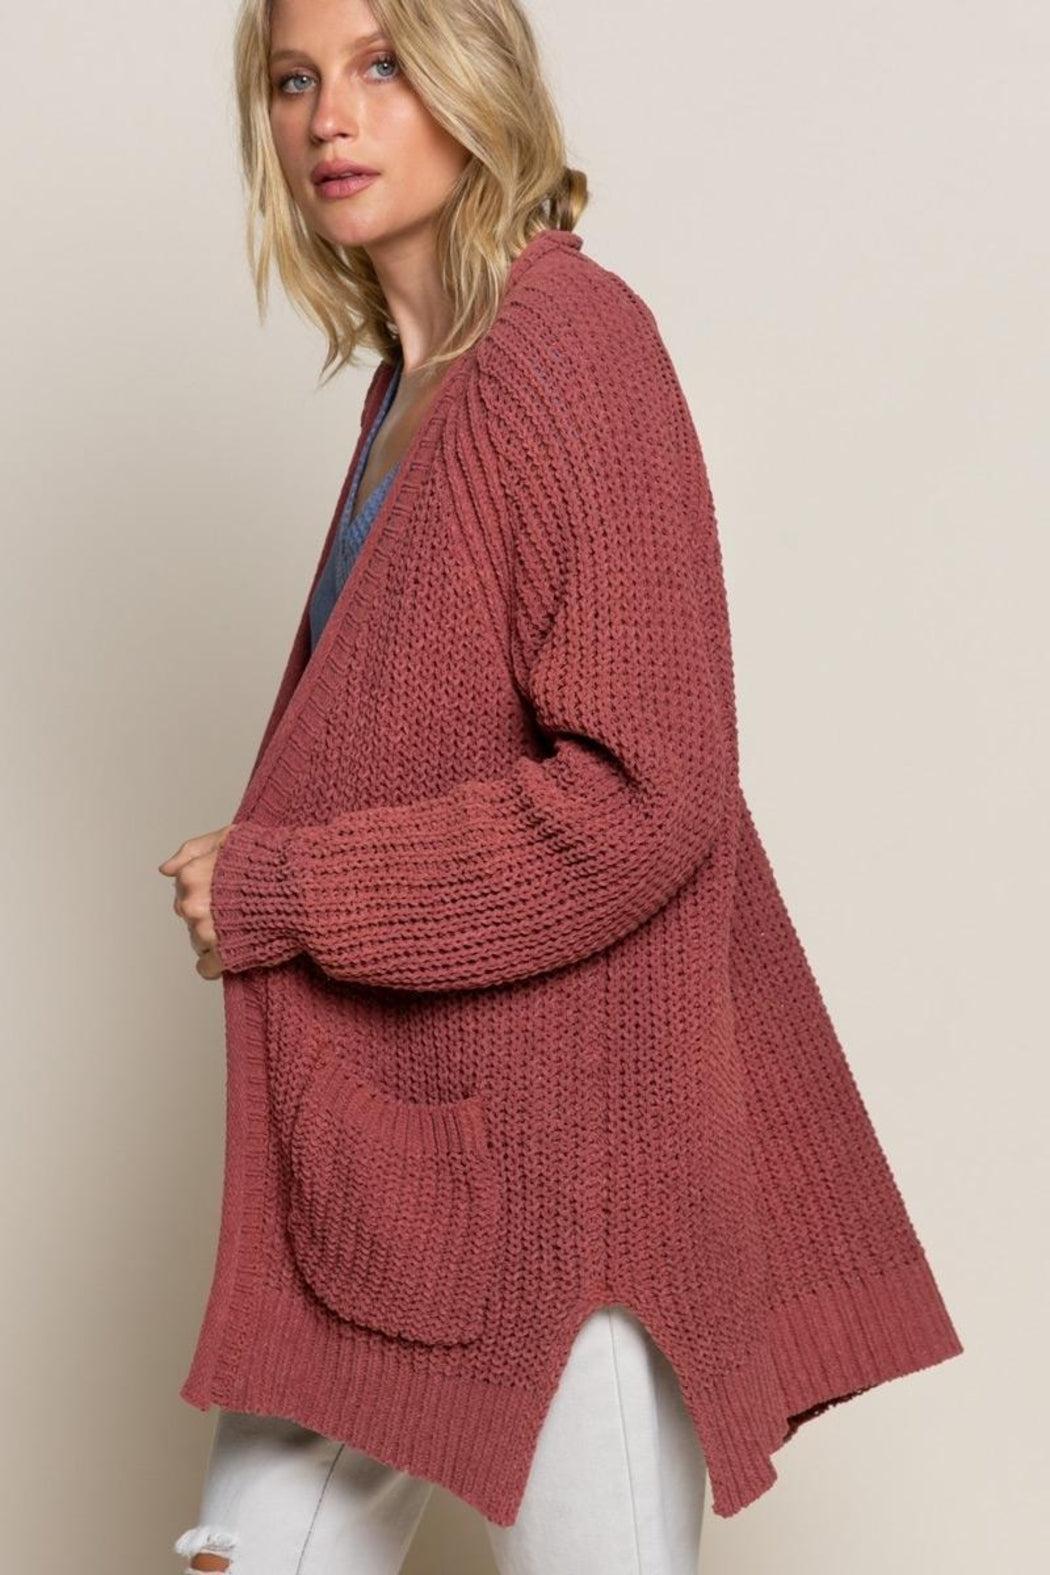 Cable Knit Cardigan Product Image